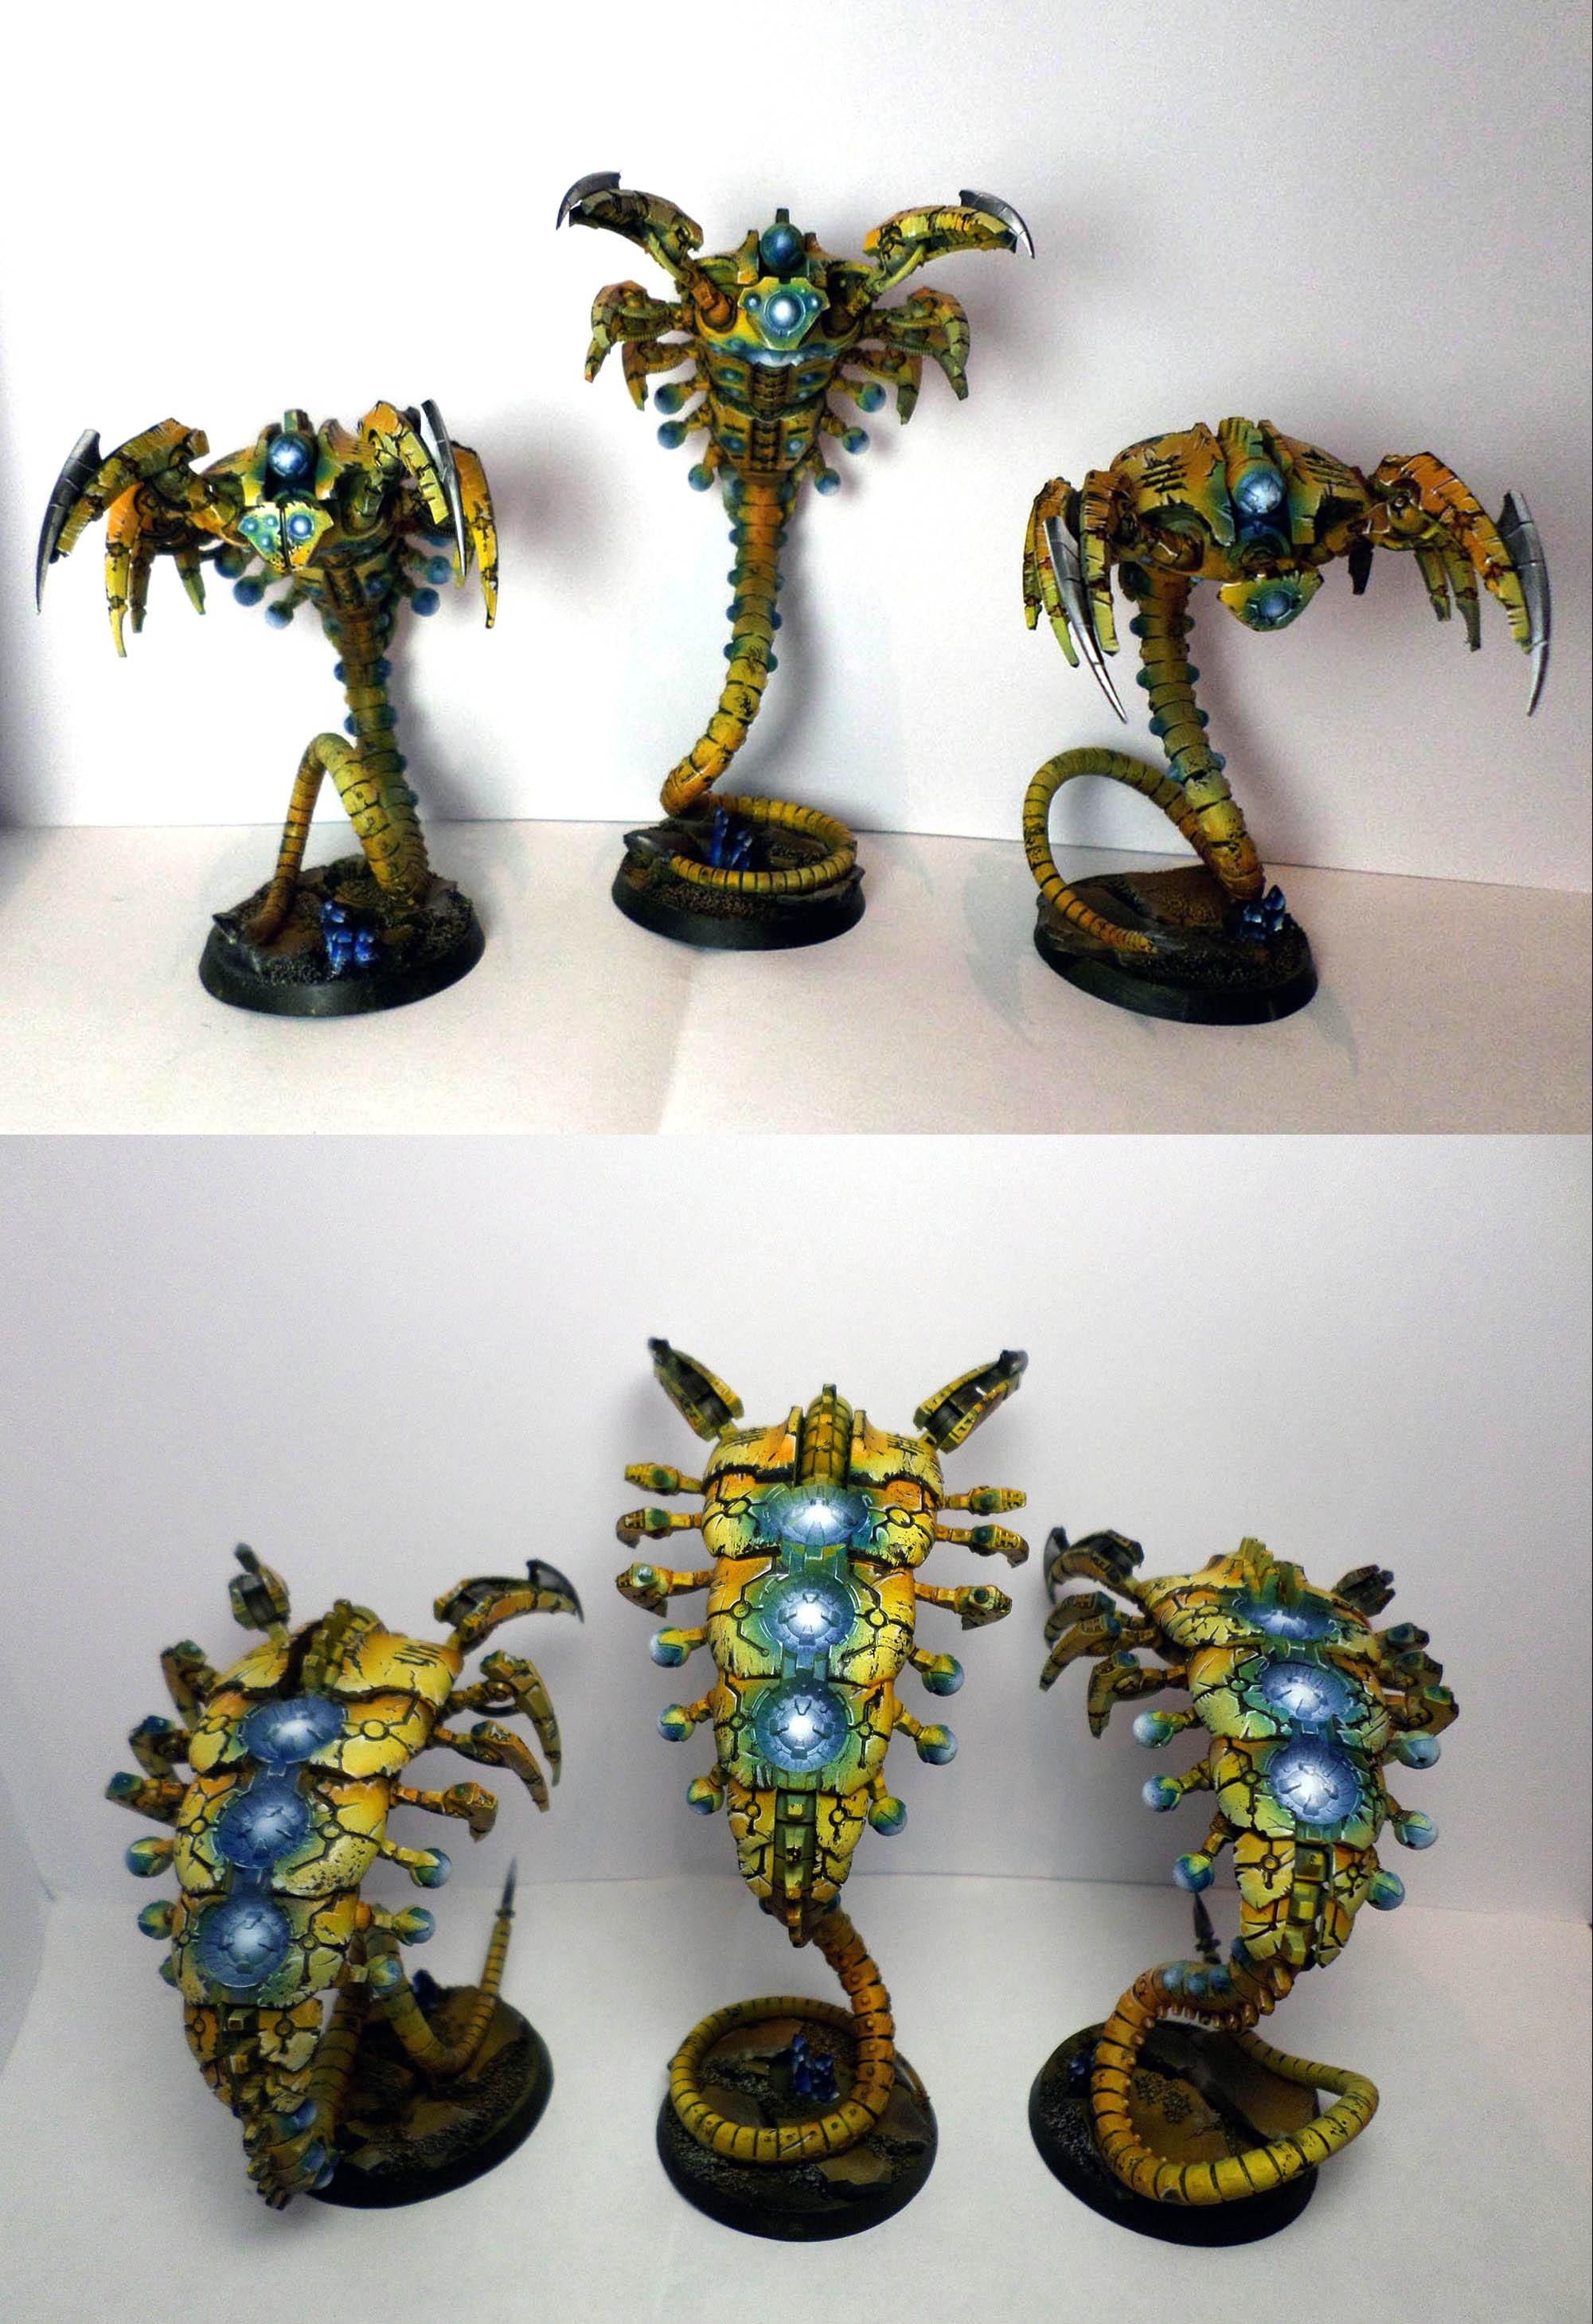 Canoptec Wraiths, Canoptek Wraiths, Freehand, Necrons, Yellow